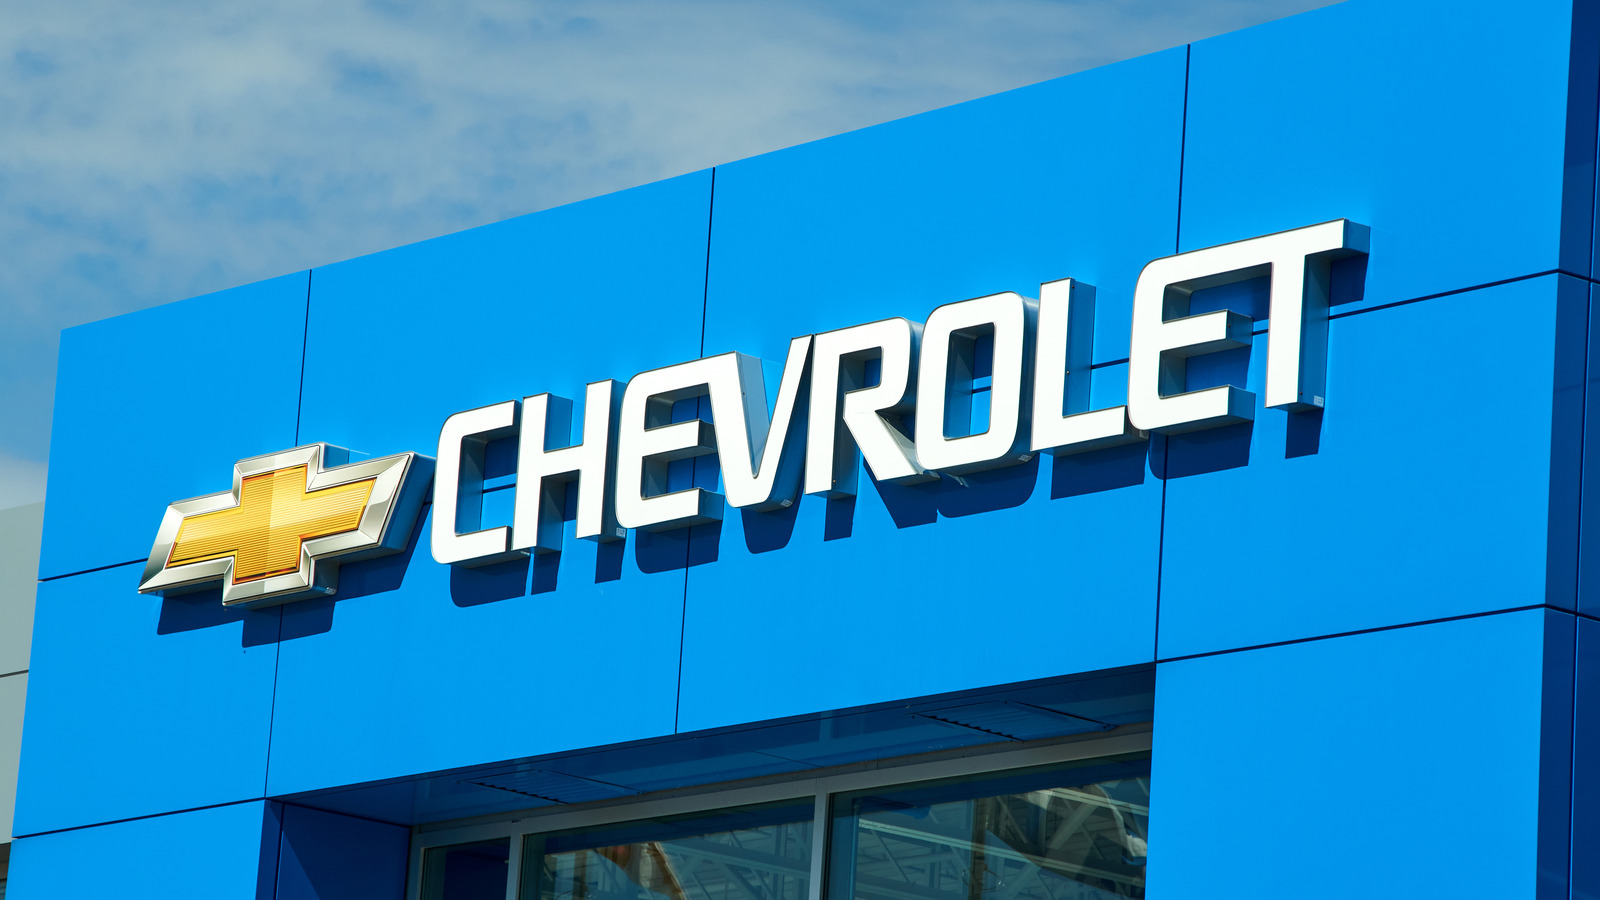 The Mysterious History Behind The Chevrolet Logo